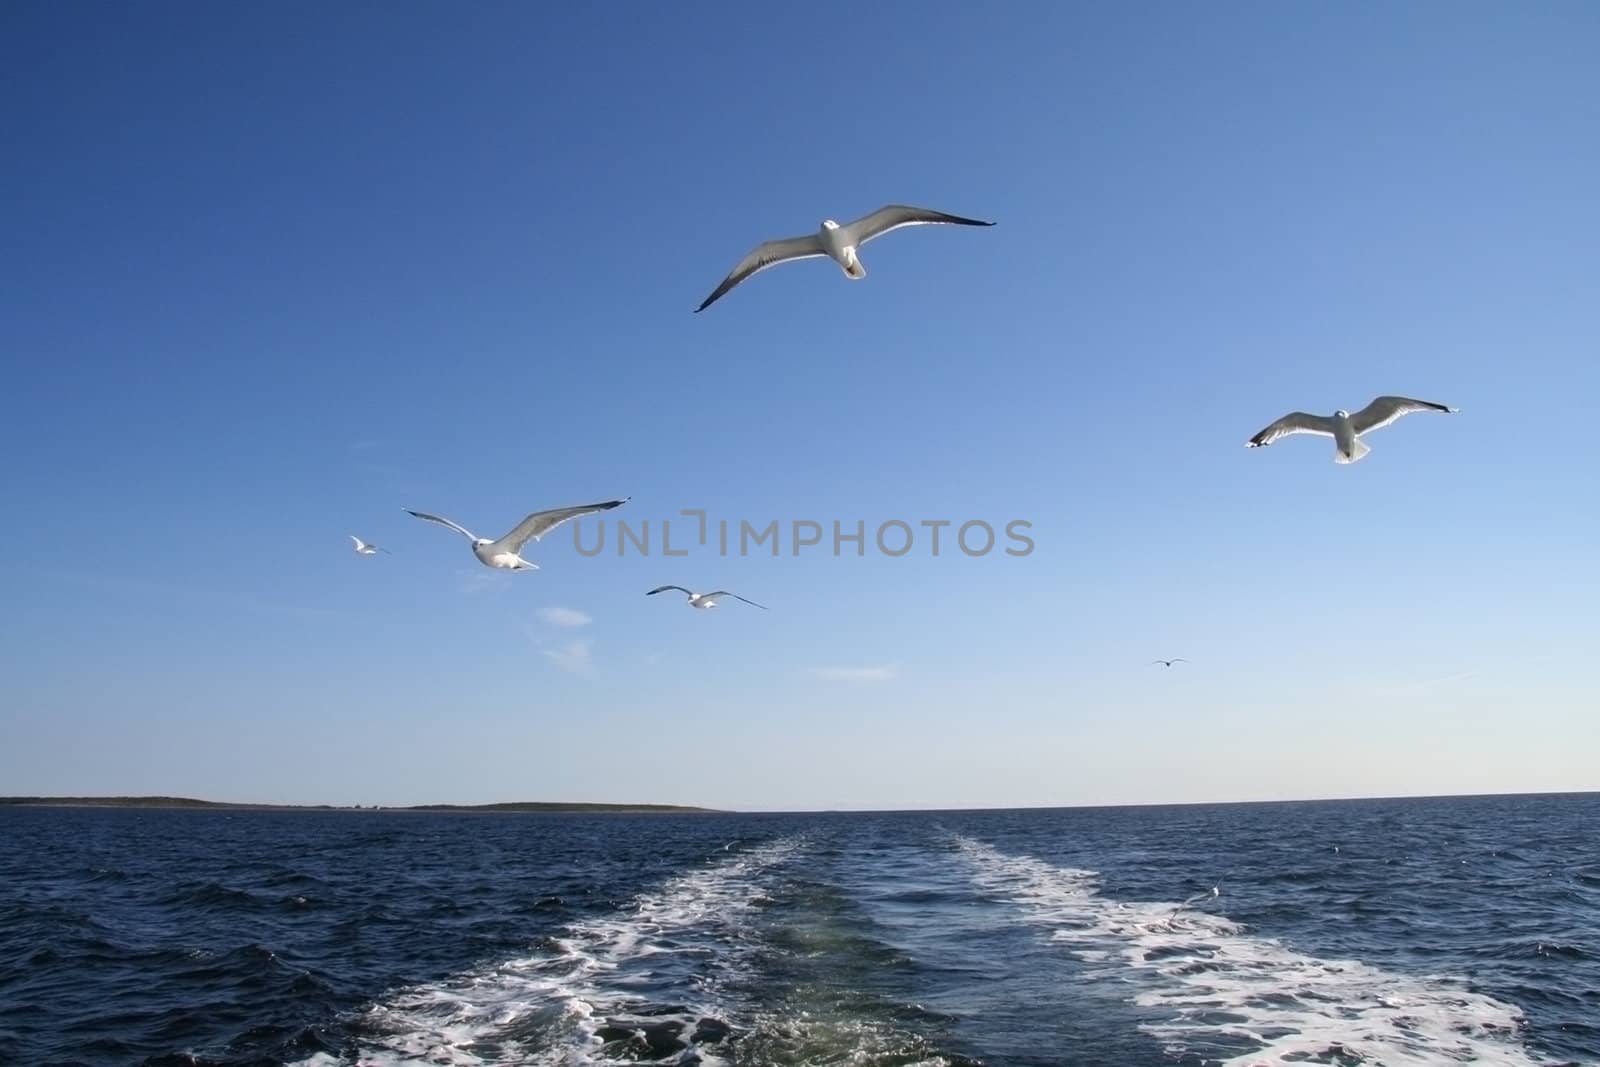 A seagulls soaring in the blue sky